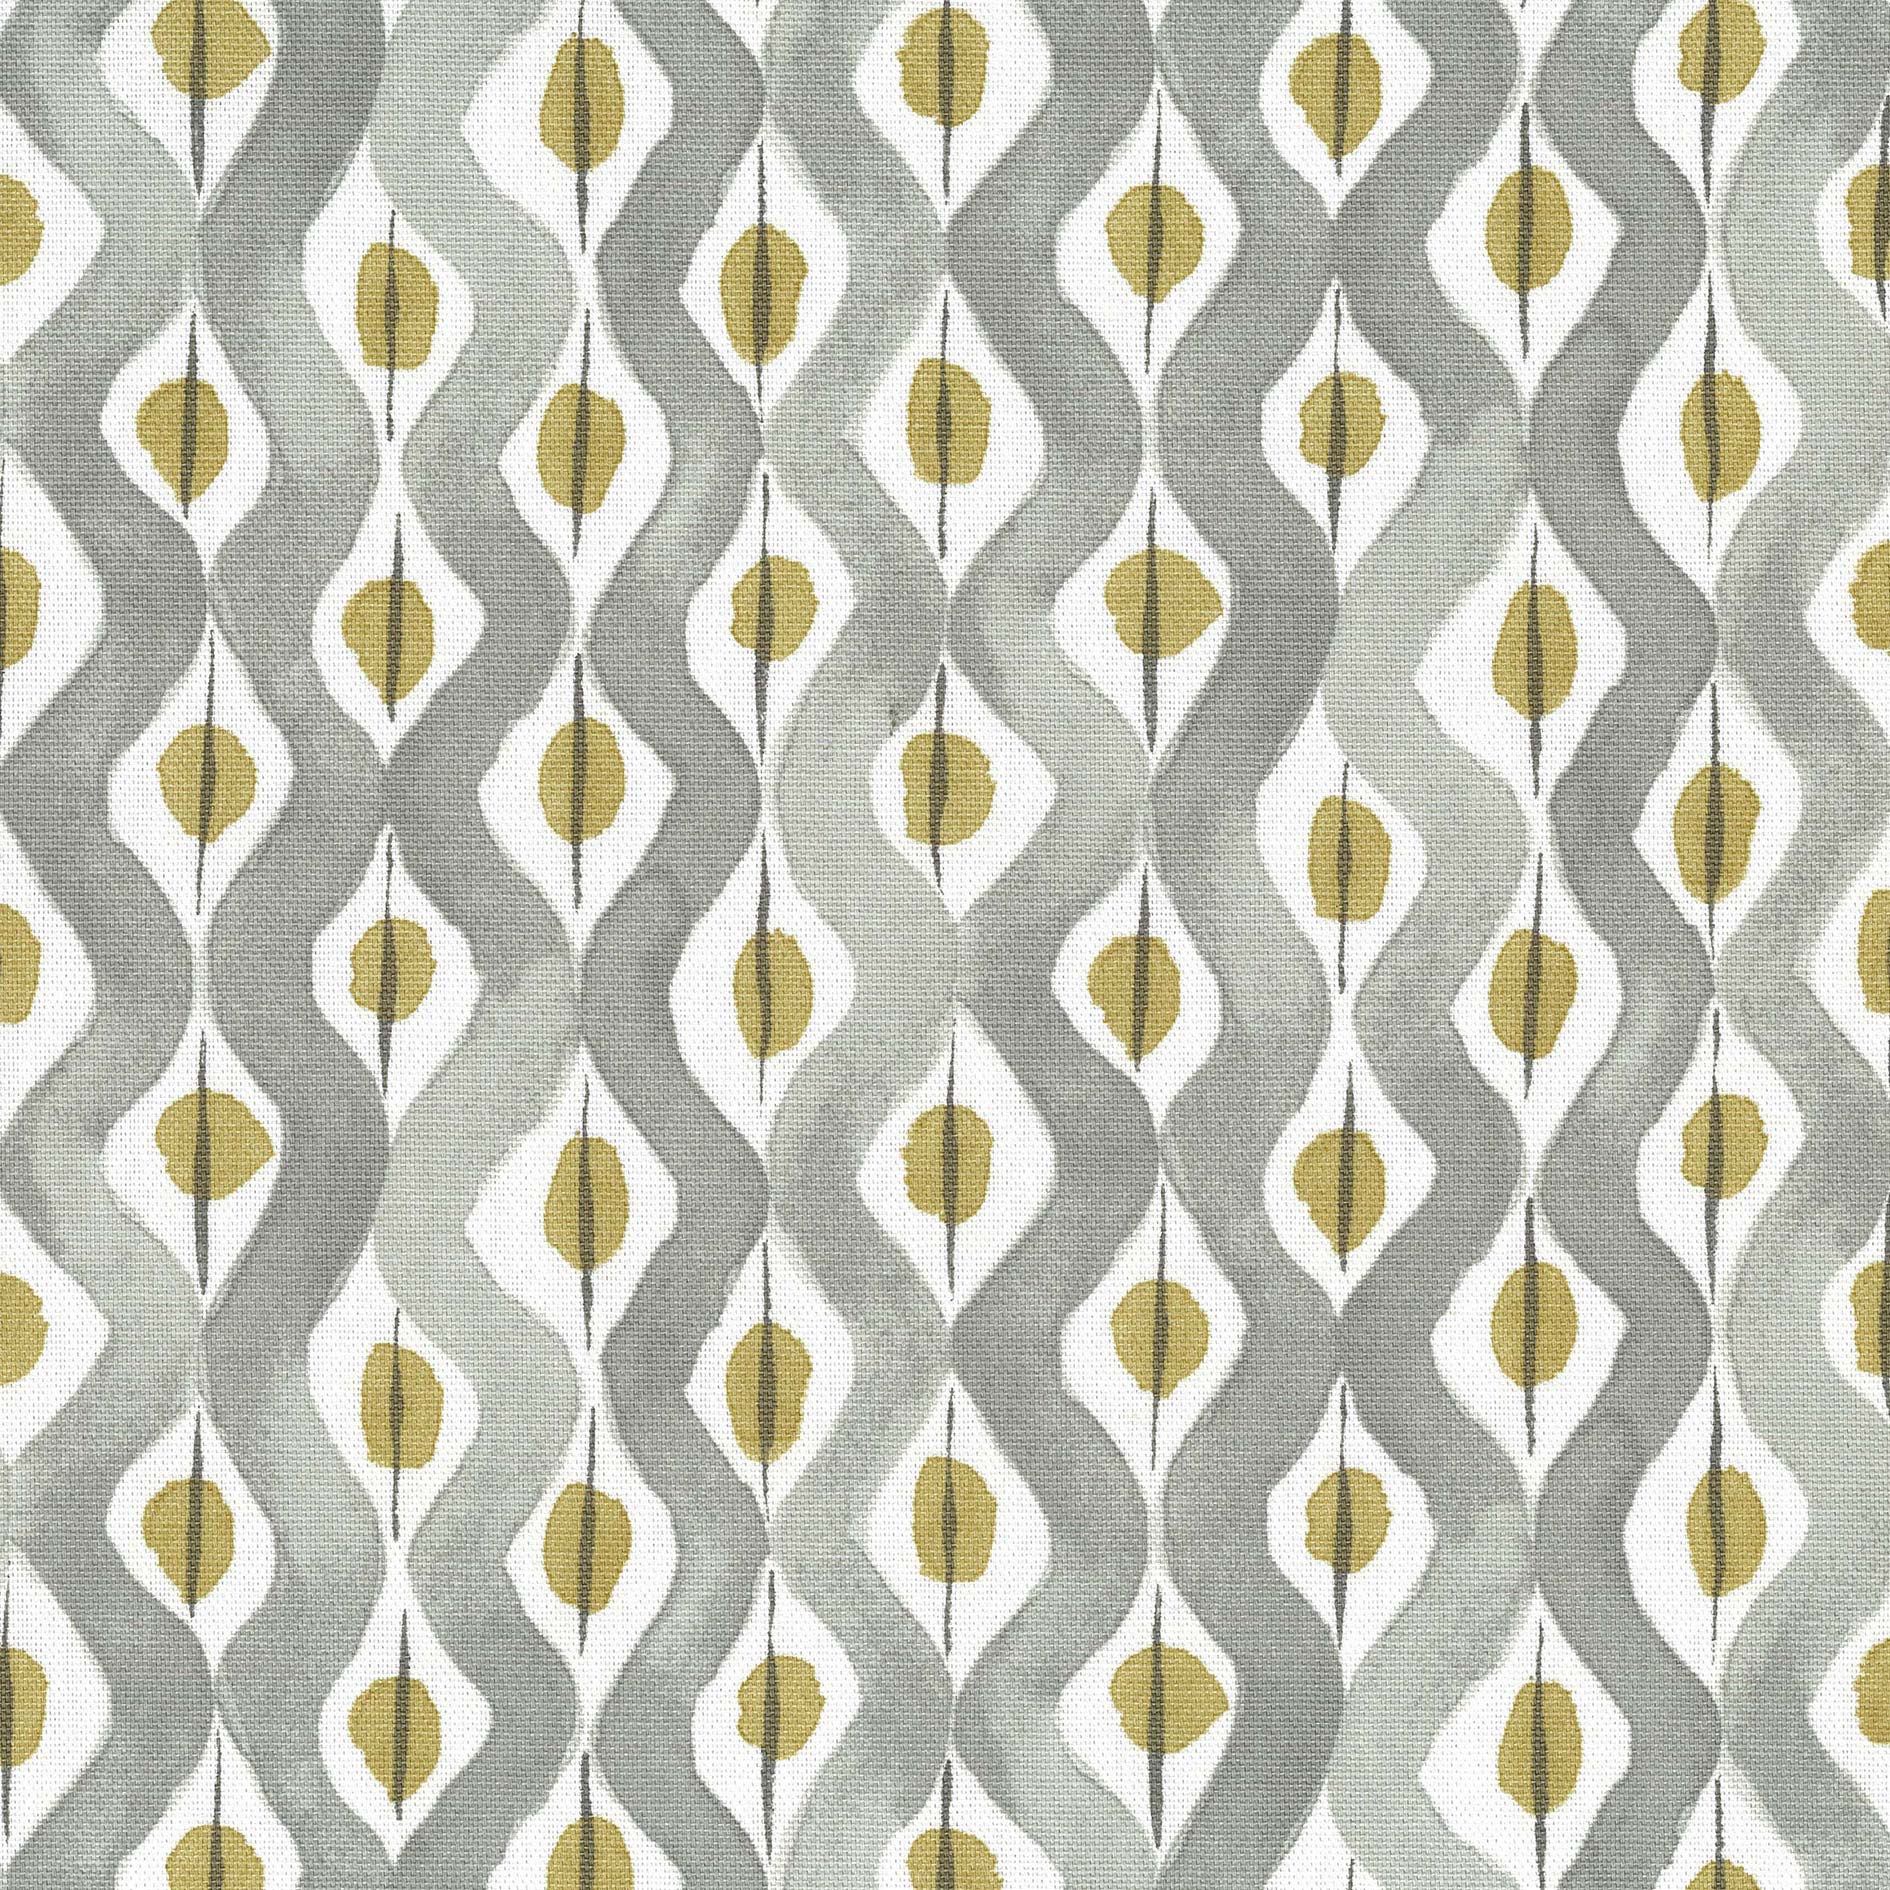 Nina Campbell Fabric - Les Rêves Beau Rivage Dove/Gold NCF4295-03